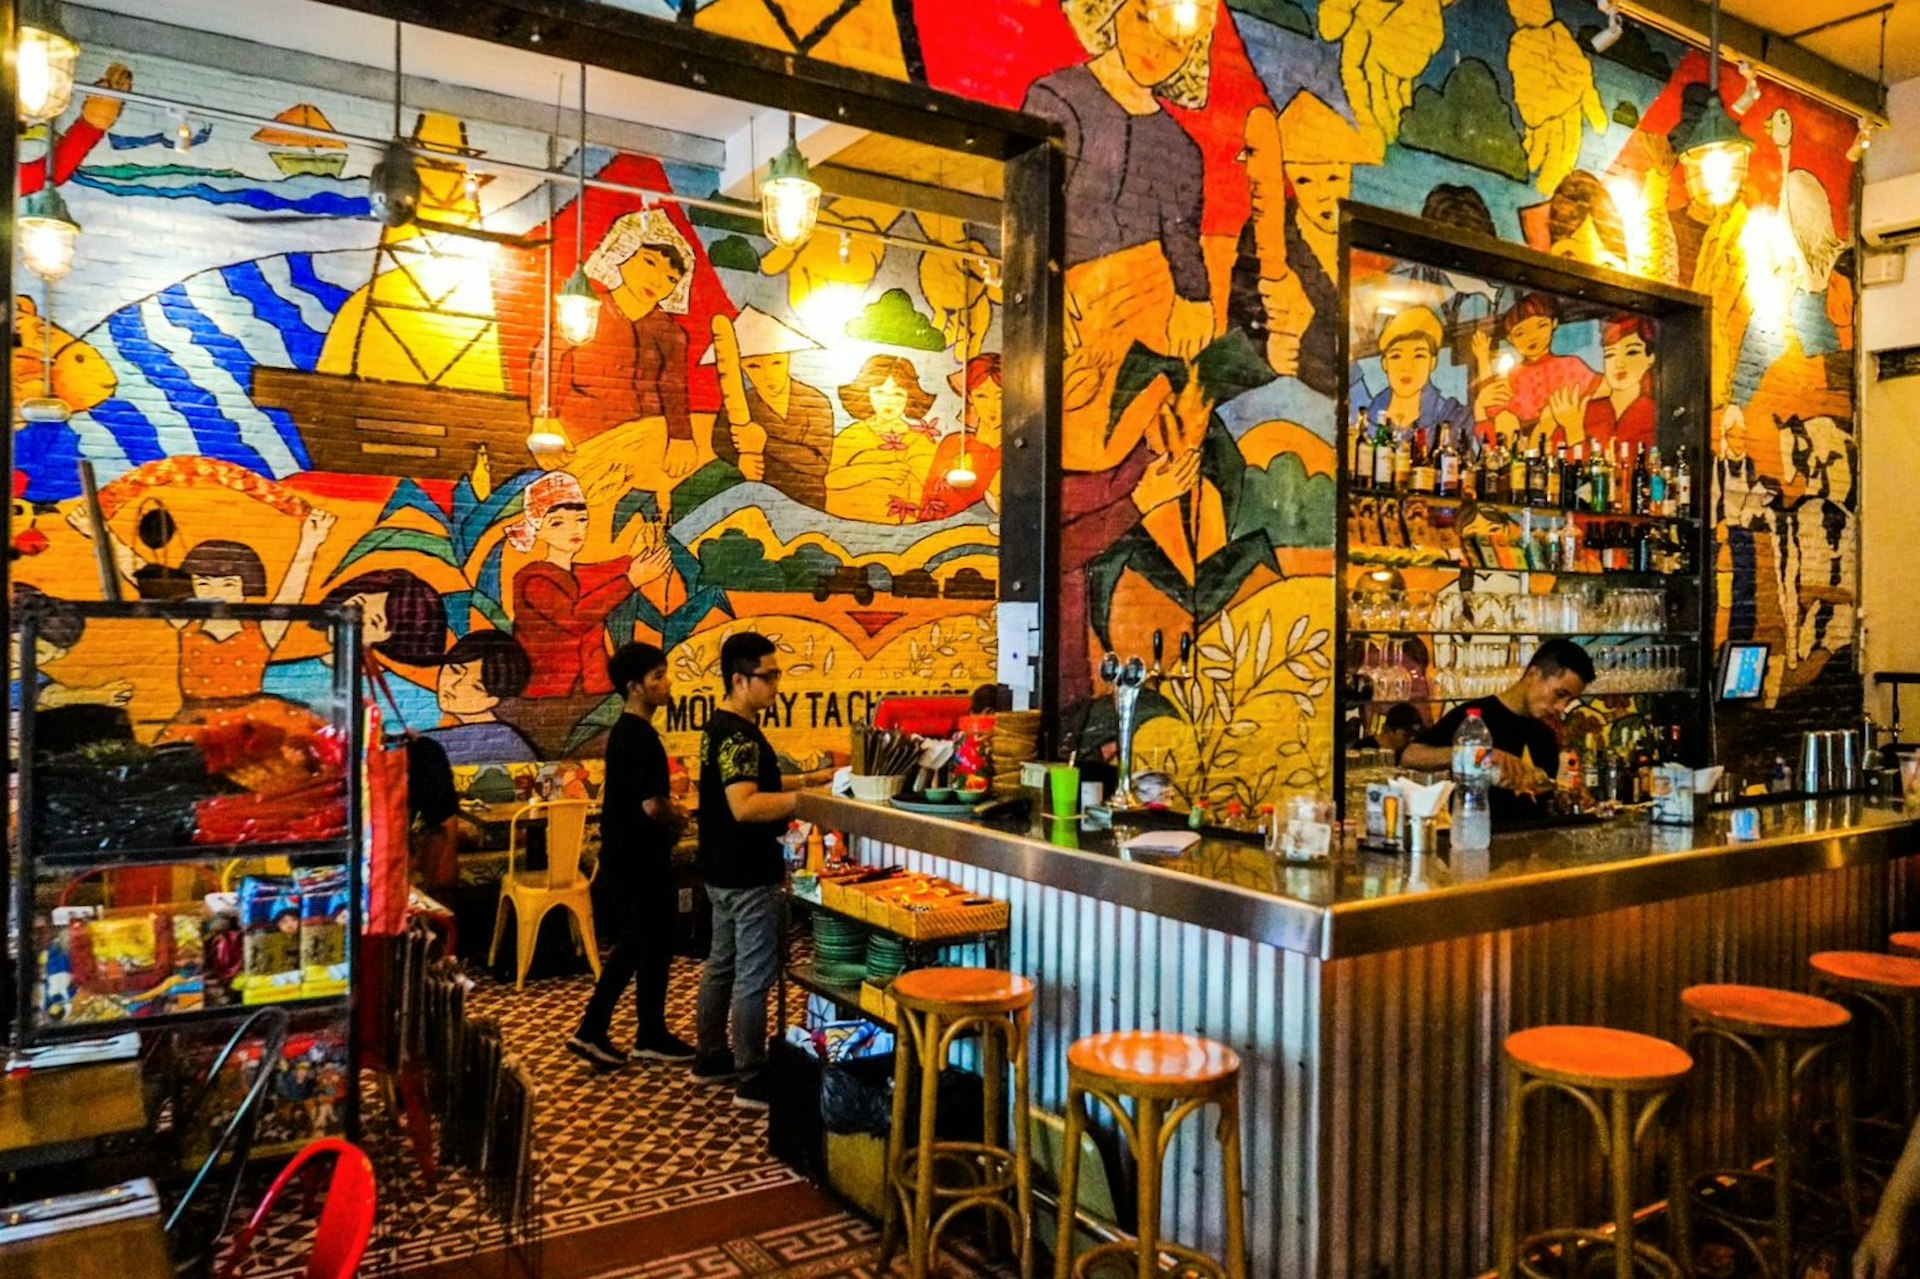 The interior of cafe-bar Propaganda Bistro, its walls completely covered in brightly coloured murals in the style of old propaganda art